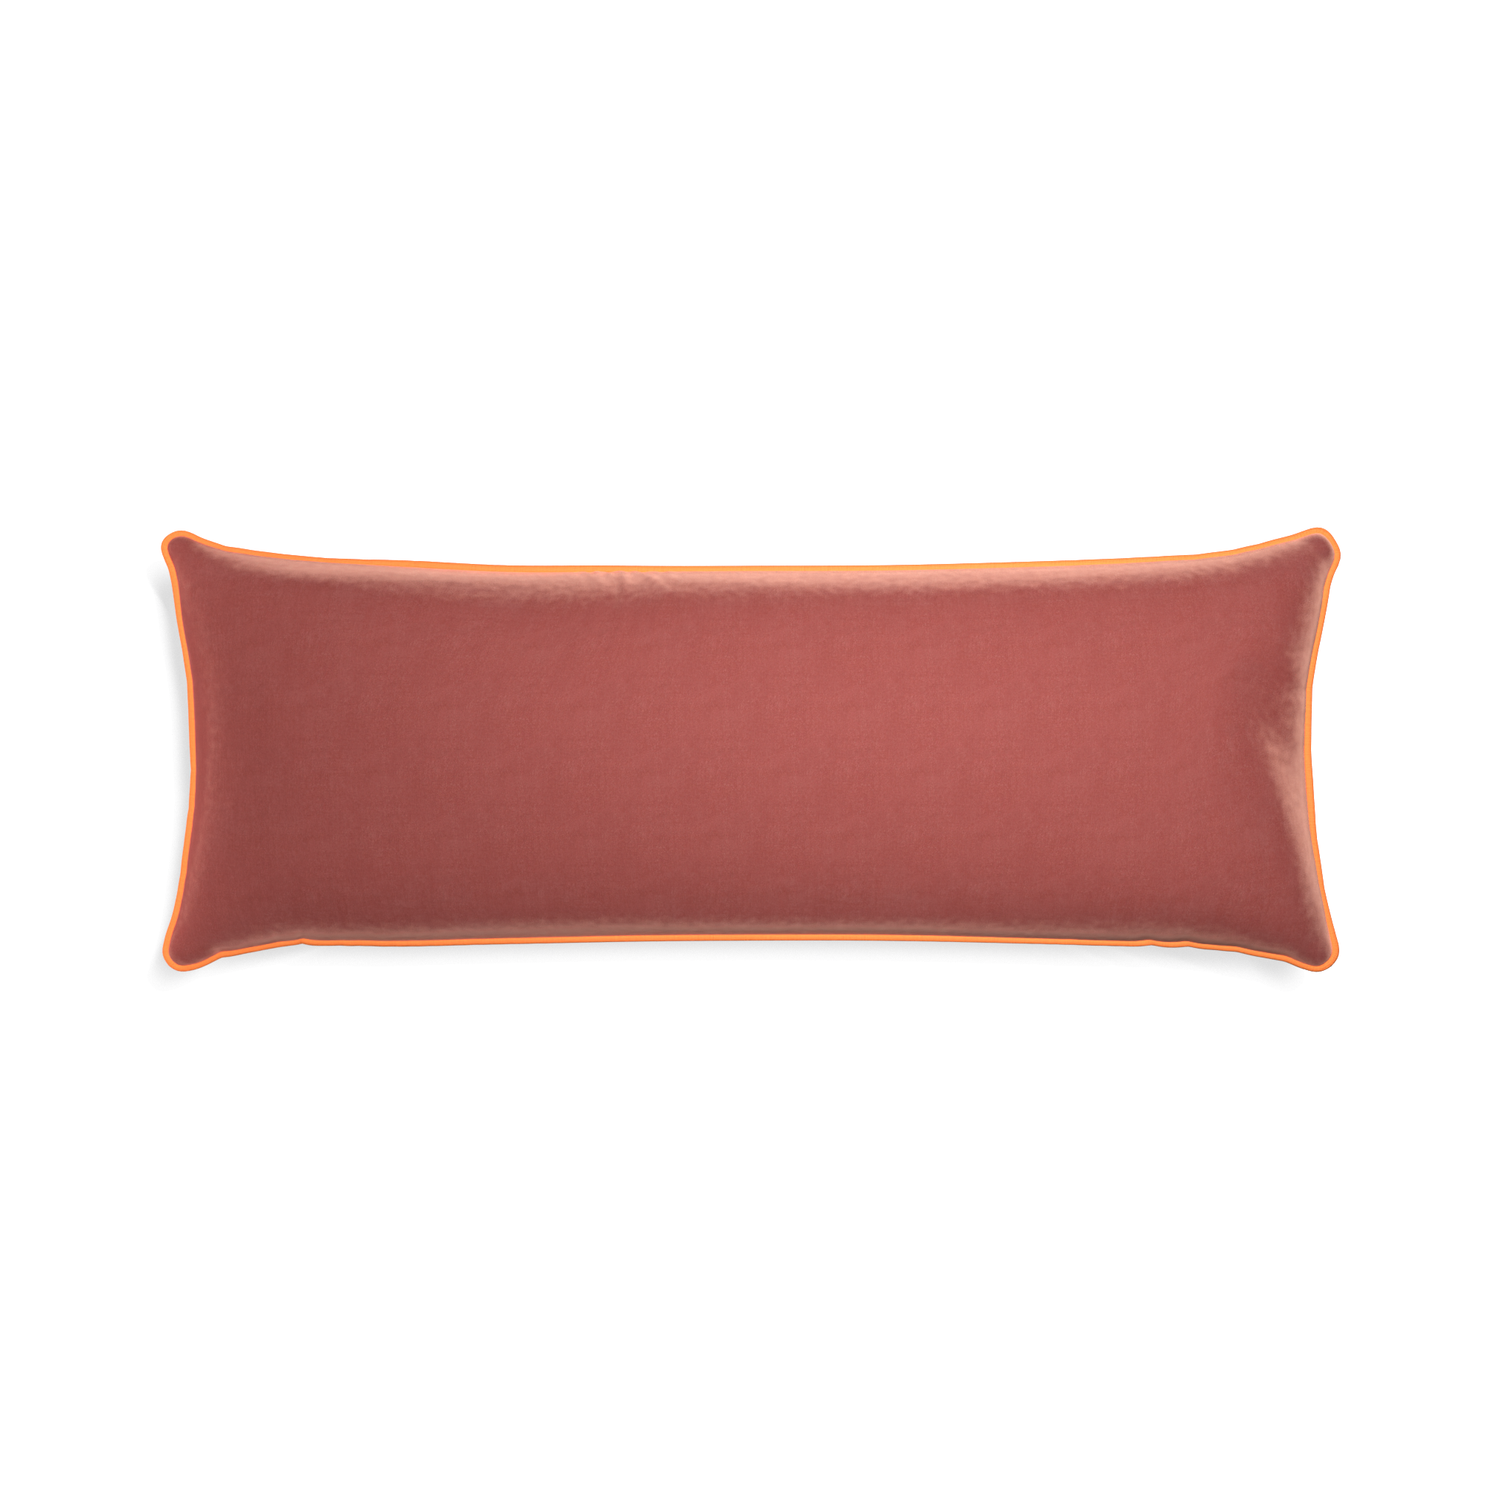 Xl-lumbar cosmo velvet custom coralpillow with clementine piping on white background